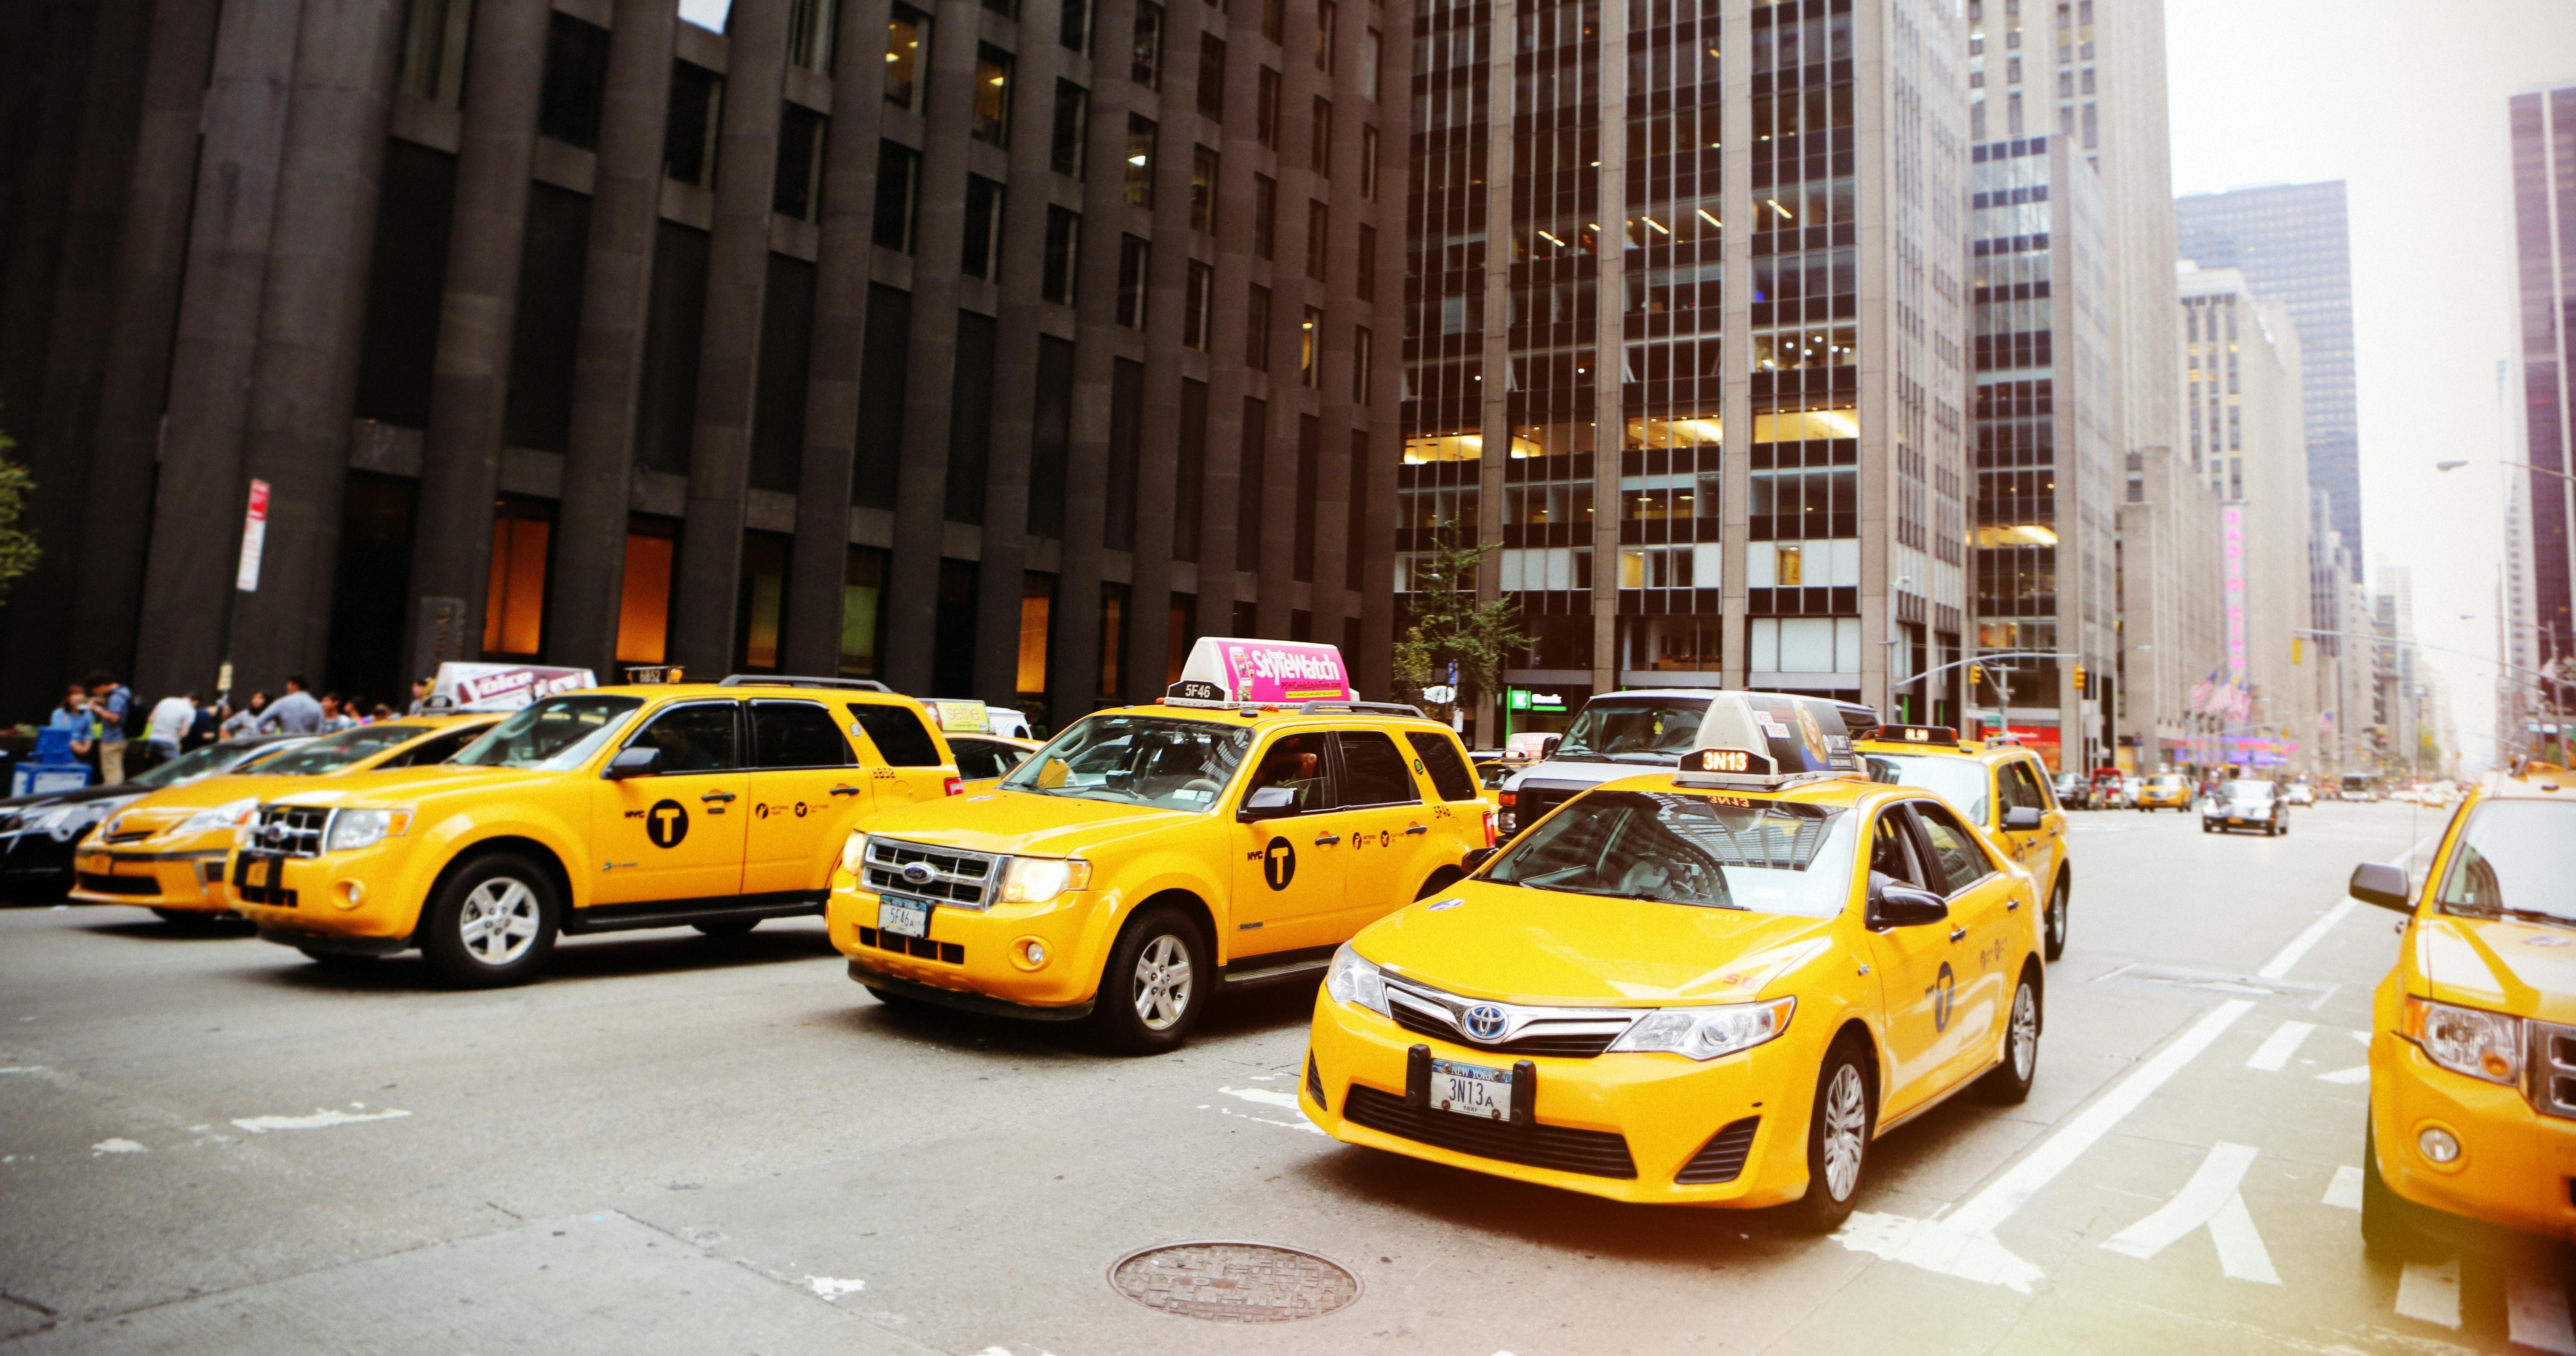 Several New York taxi cabs.